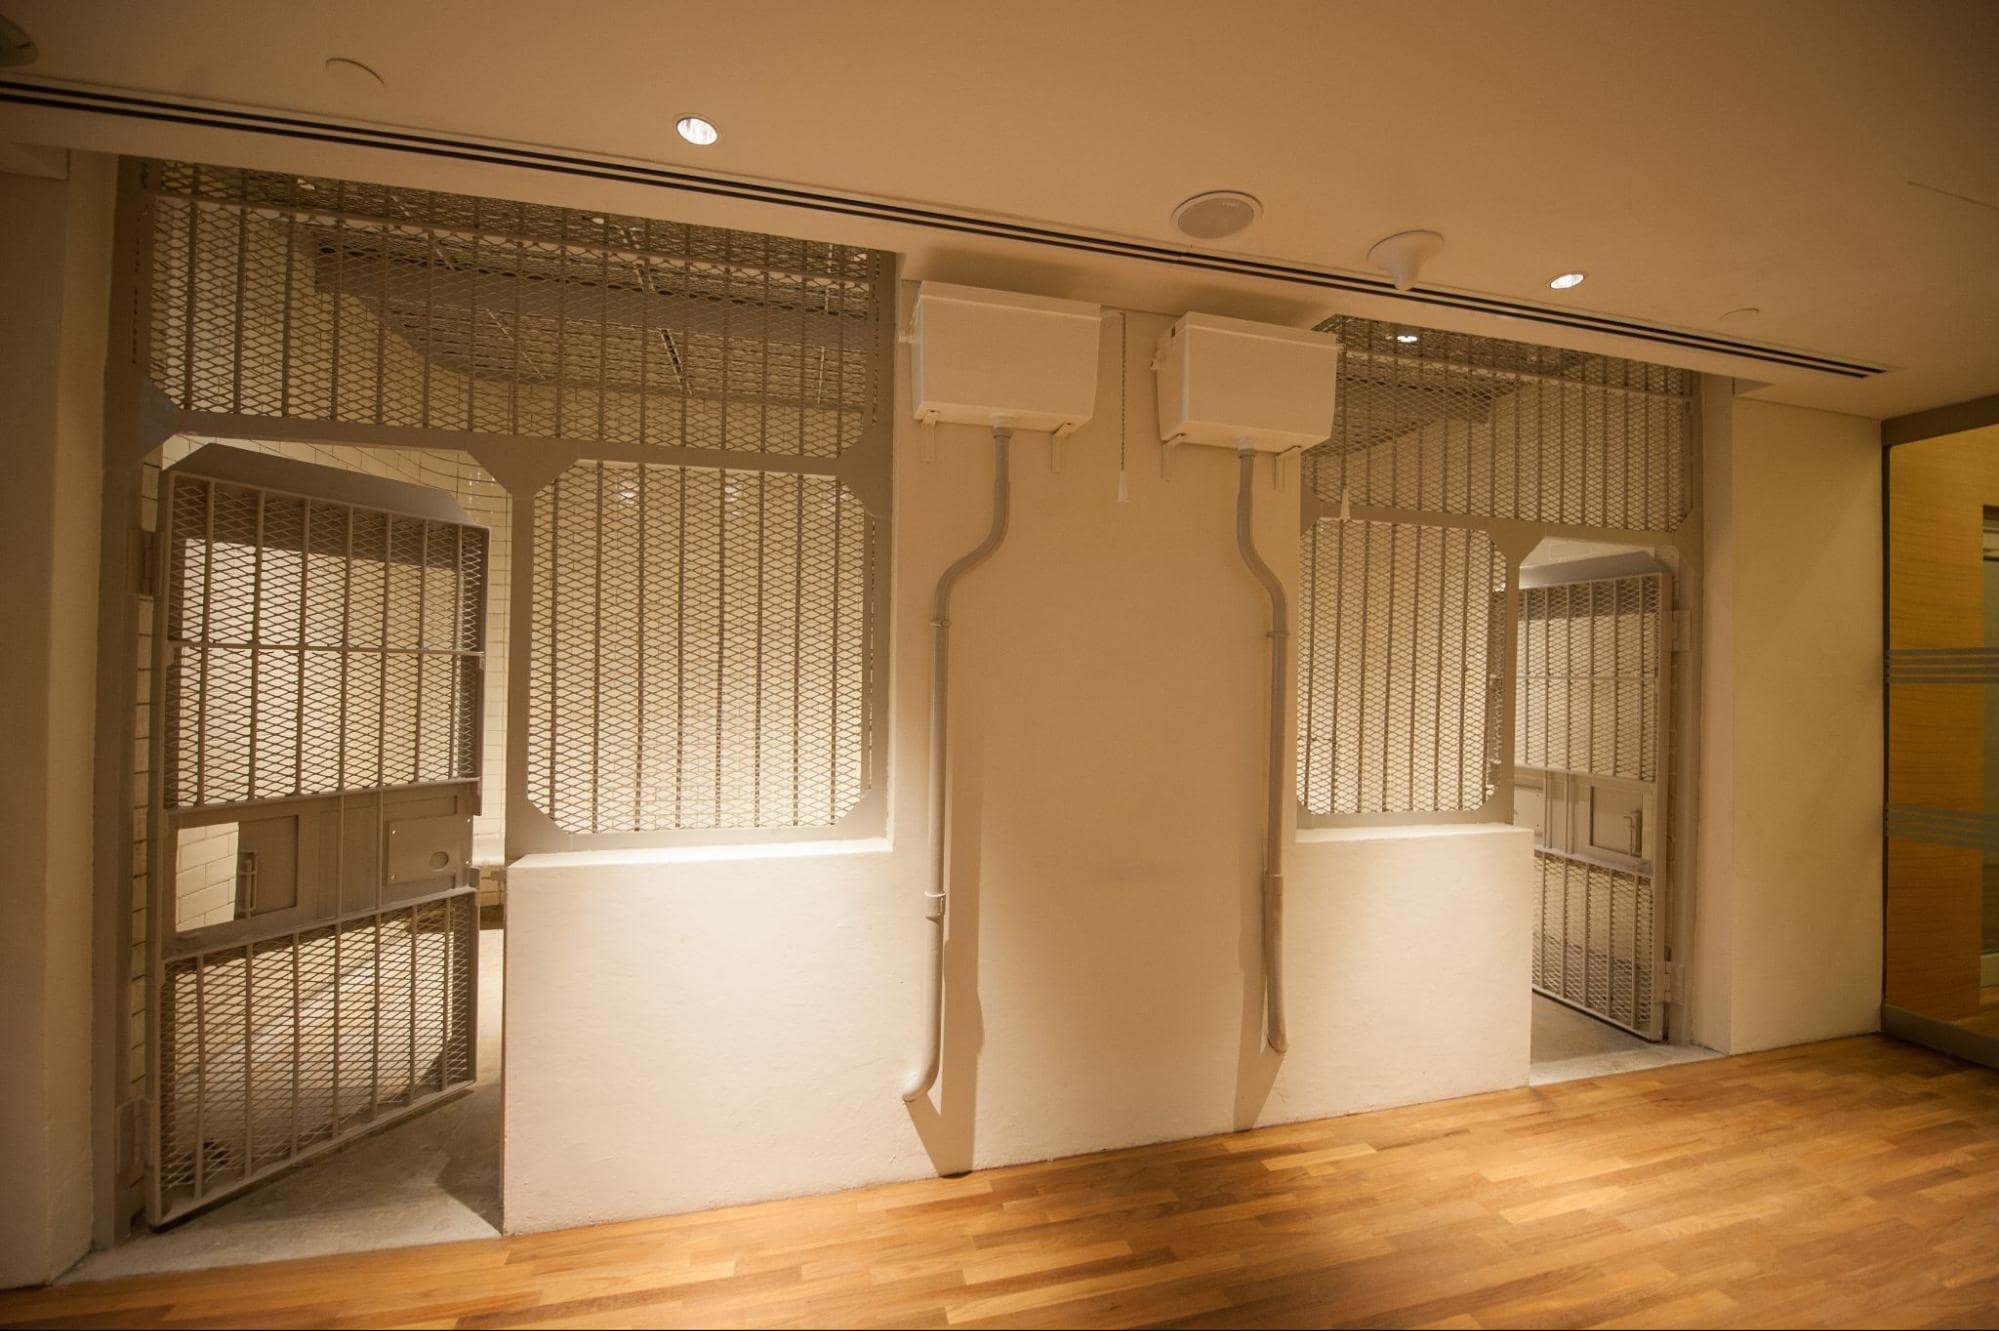 National Gallery Singapore secrets revealed - preserved jail cells